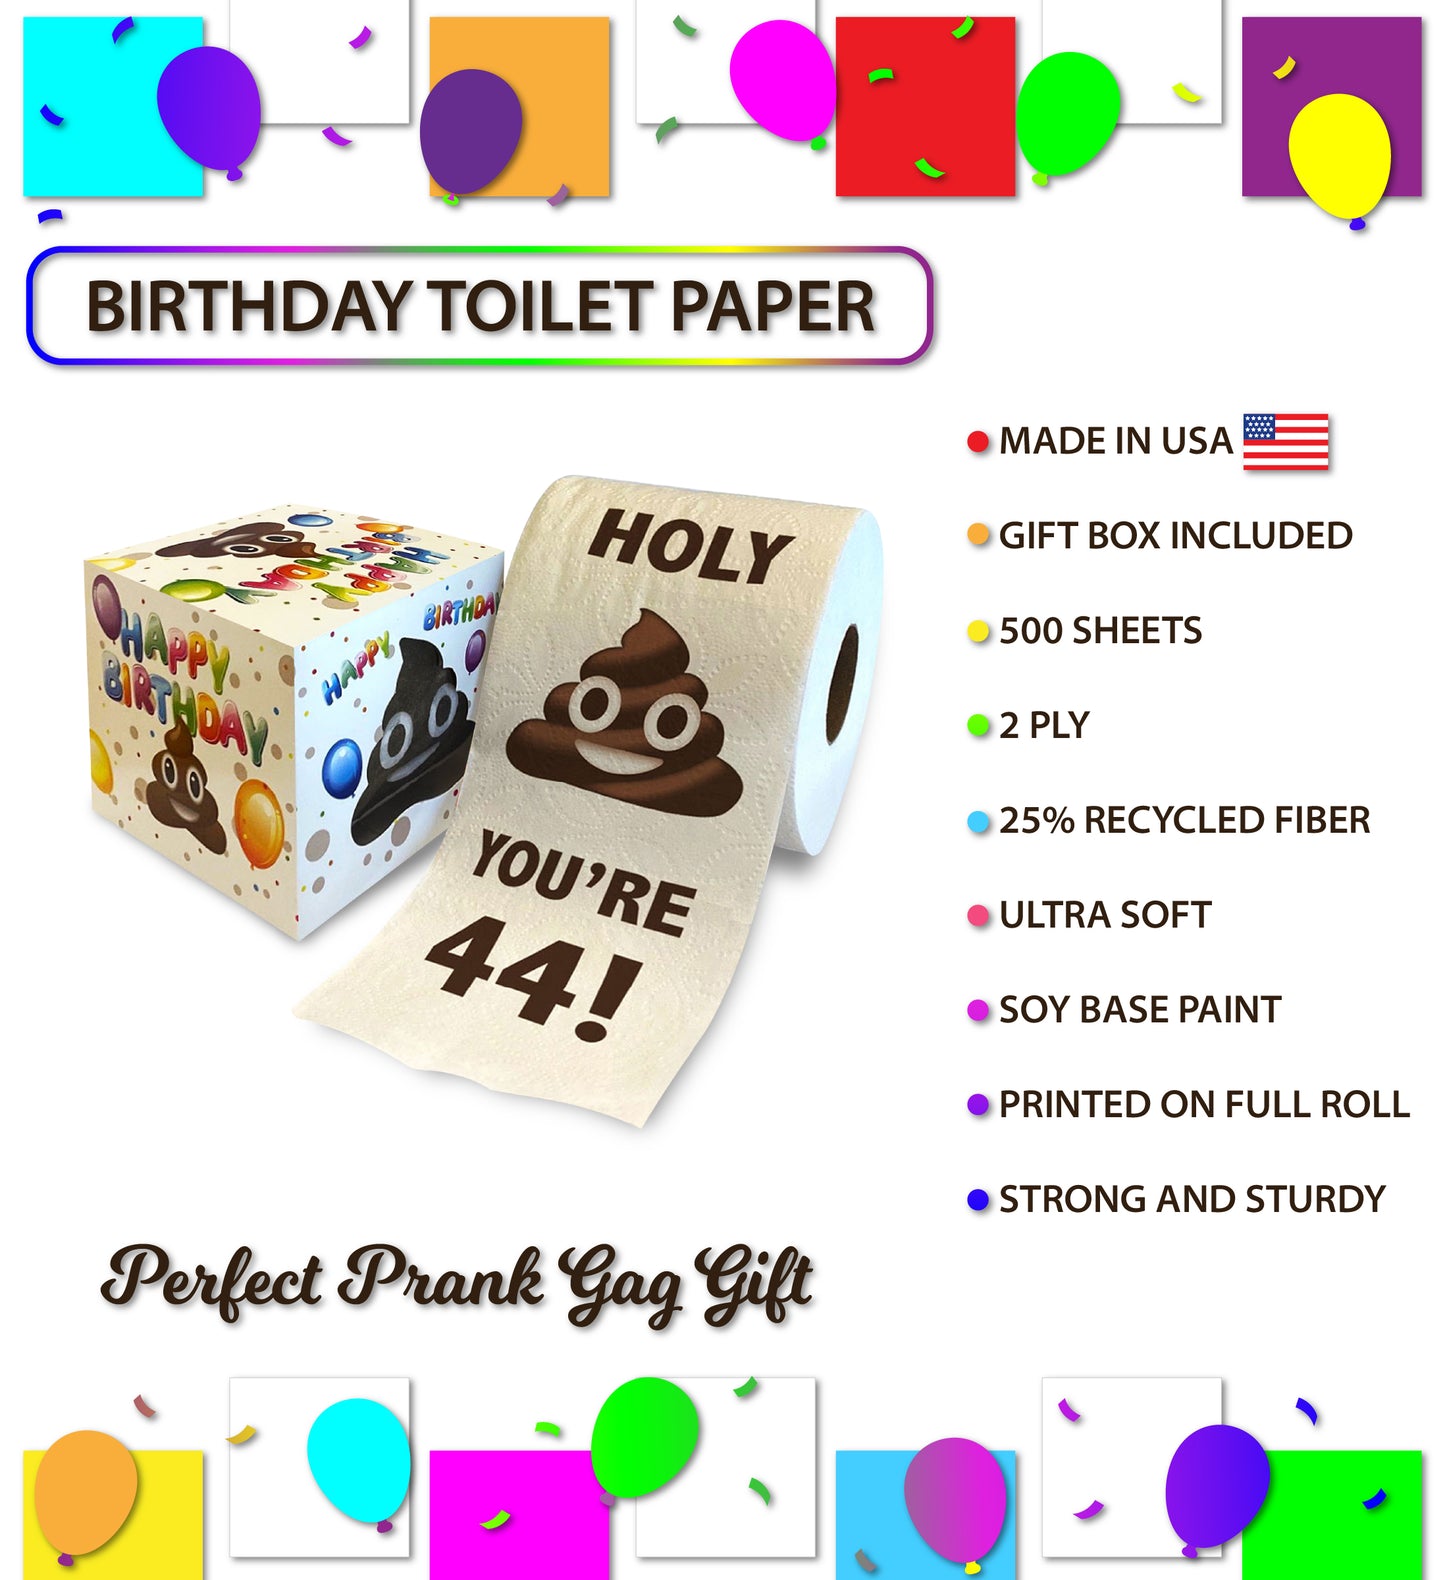 Printed TP Holy Poop You're 44 Funny Toilet Paper Roll Birthday Party Gag Gift